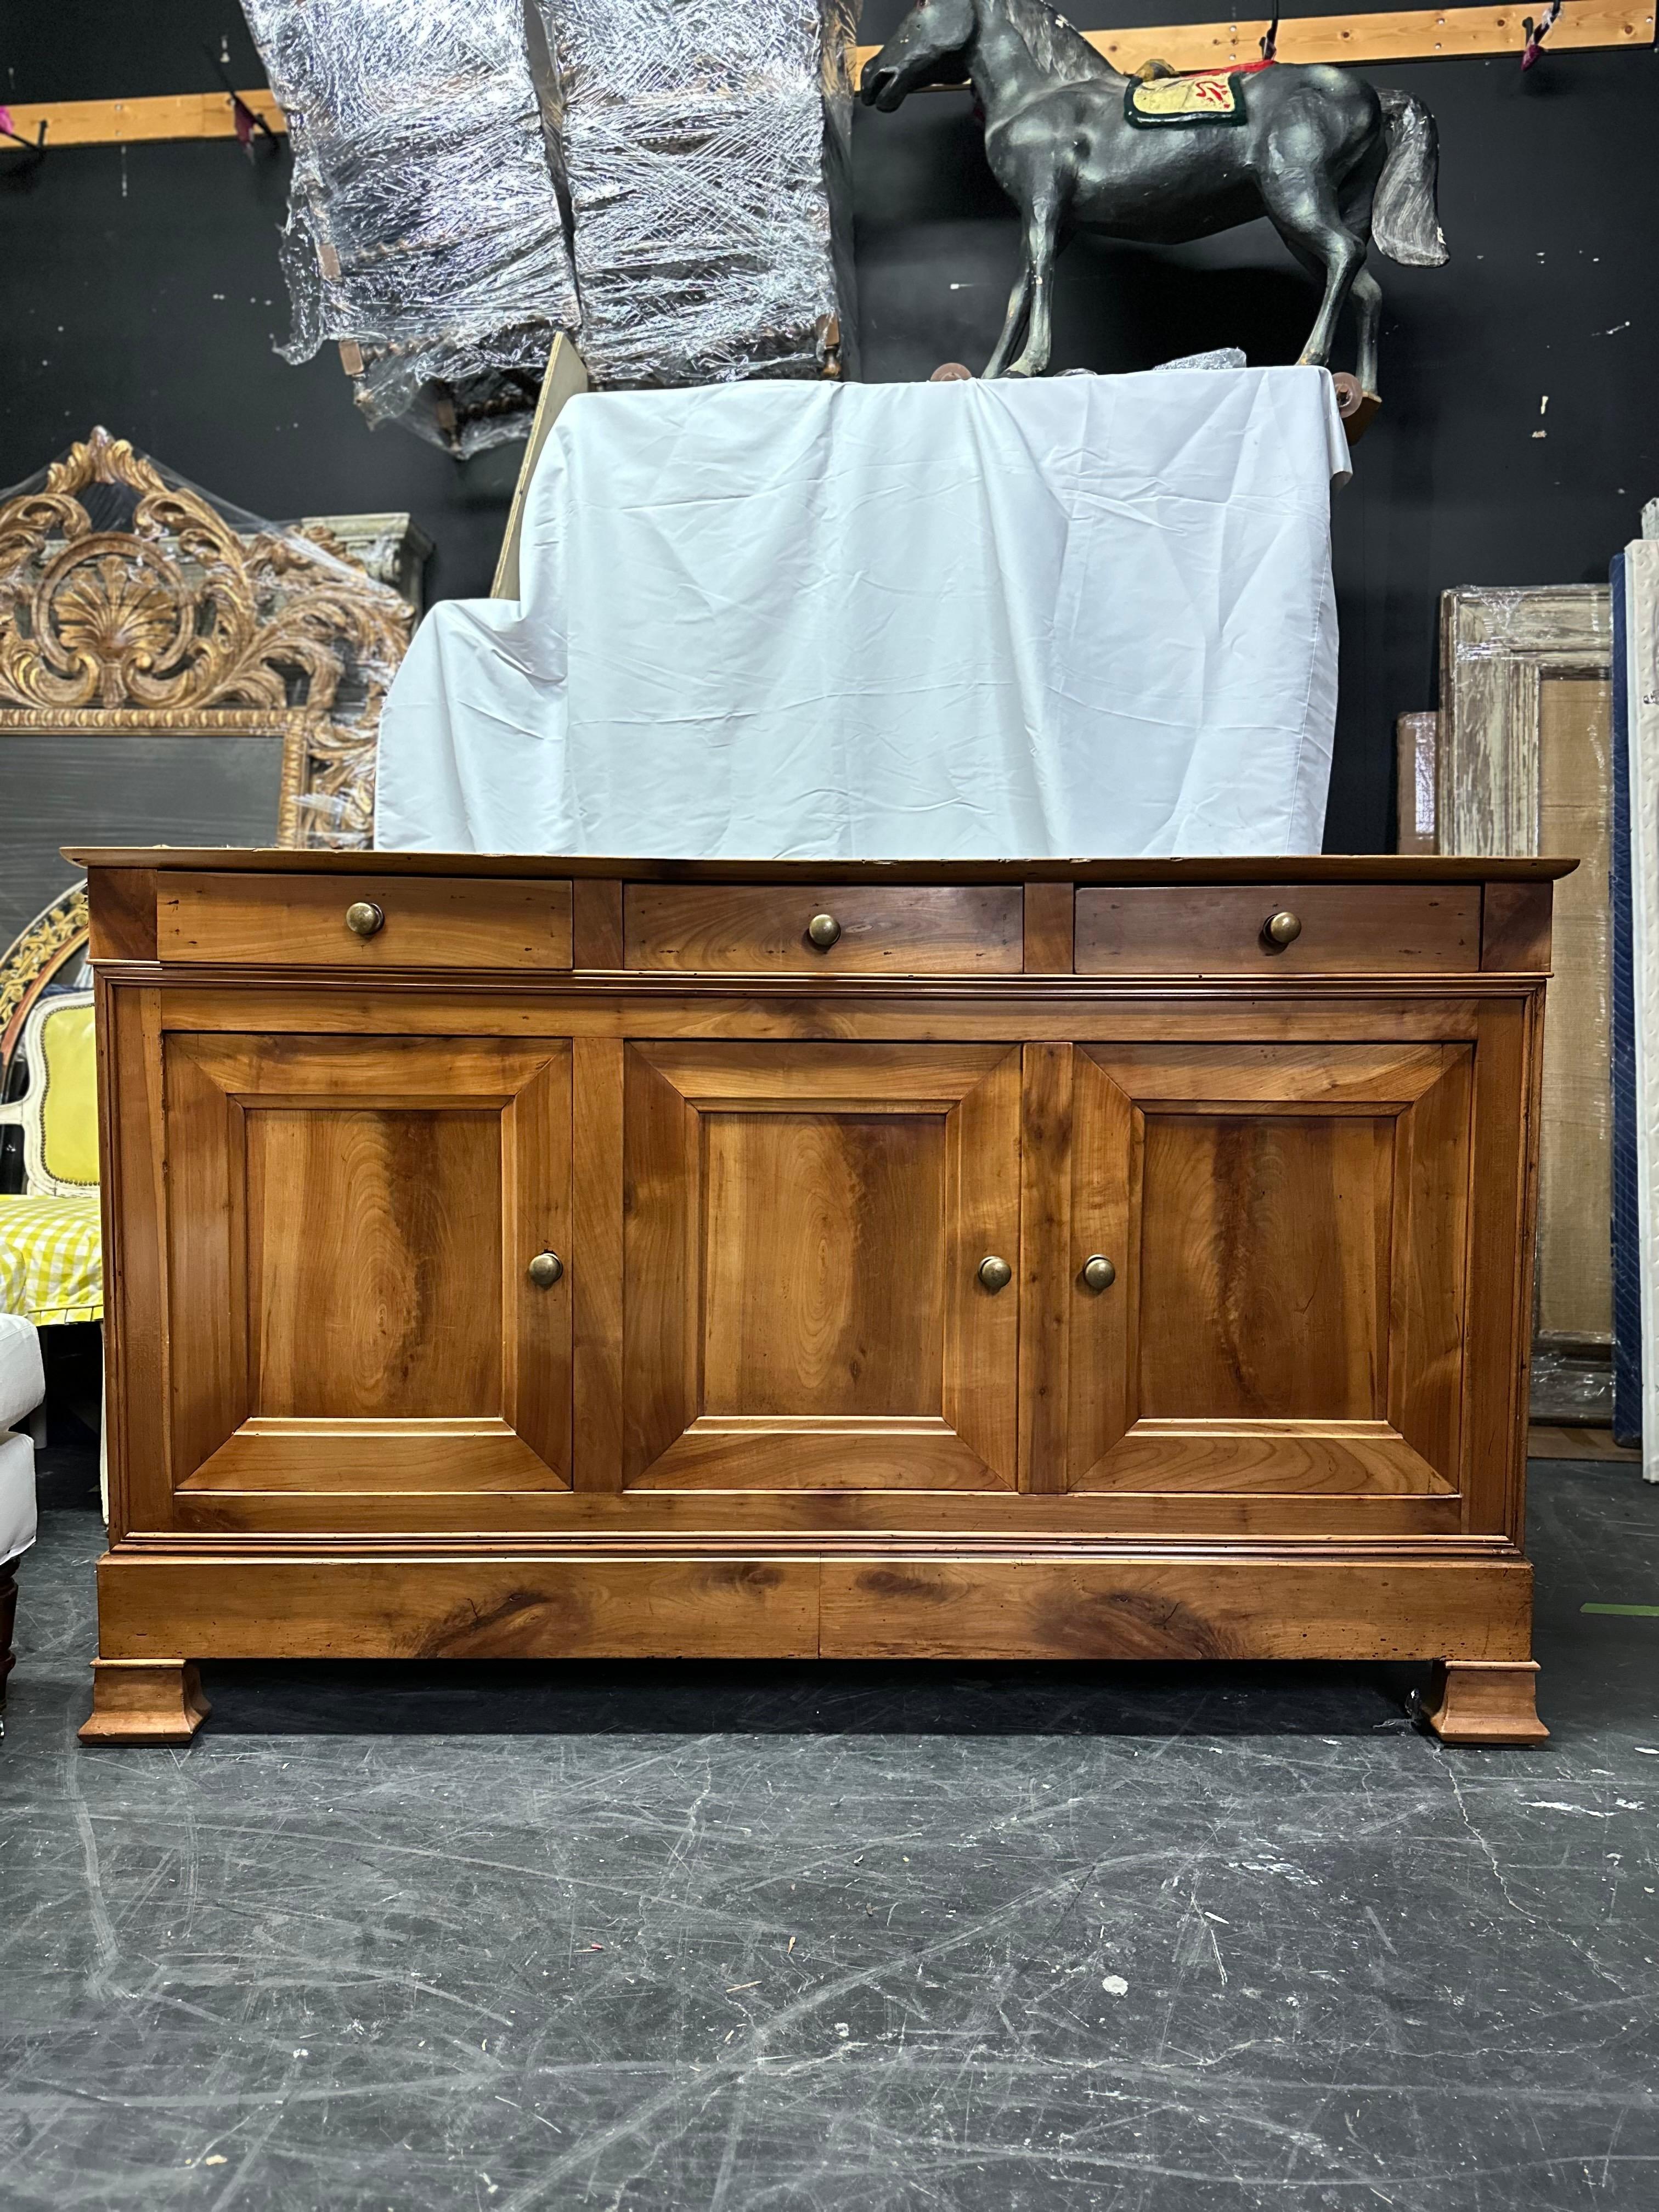 This 19th-century French Louis Philippe style enfilade is a testament to the timeless elegance of period furniture. Crafted from solid walnut around the 1890s, it boasts a sophisticated yet understated design that seamlessly marries form and